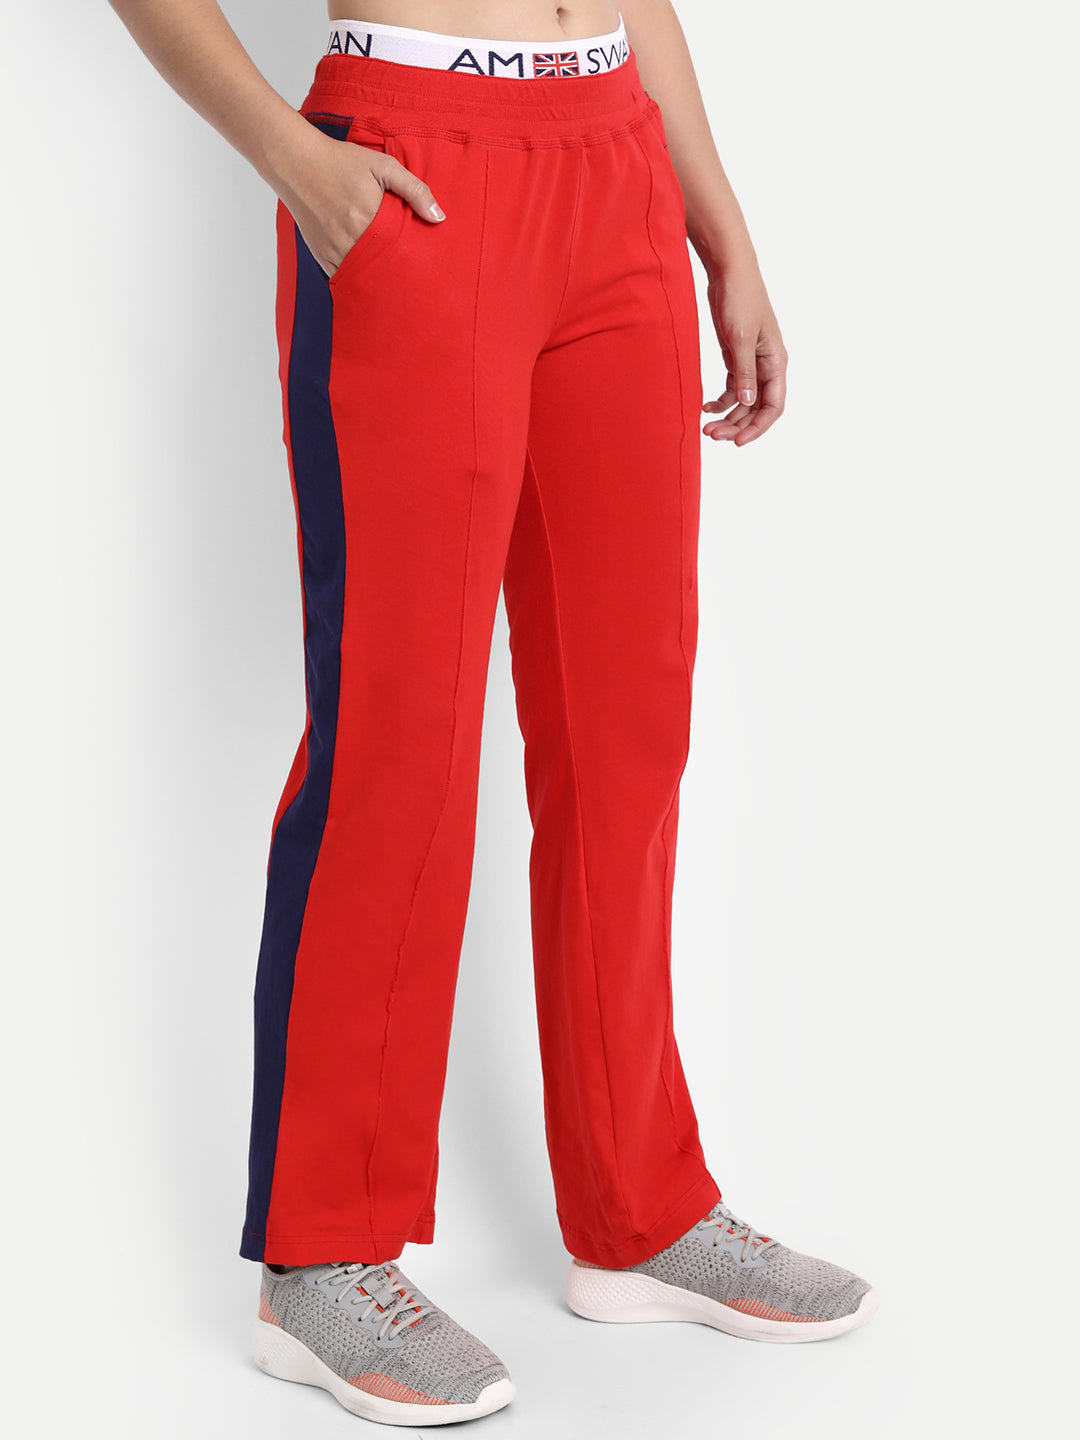 WOMENS PREMIUM RED COTTON LYCRA SMART FIT PRINTED BELT TRACK PANT